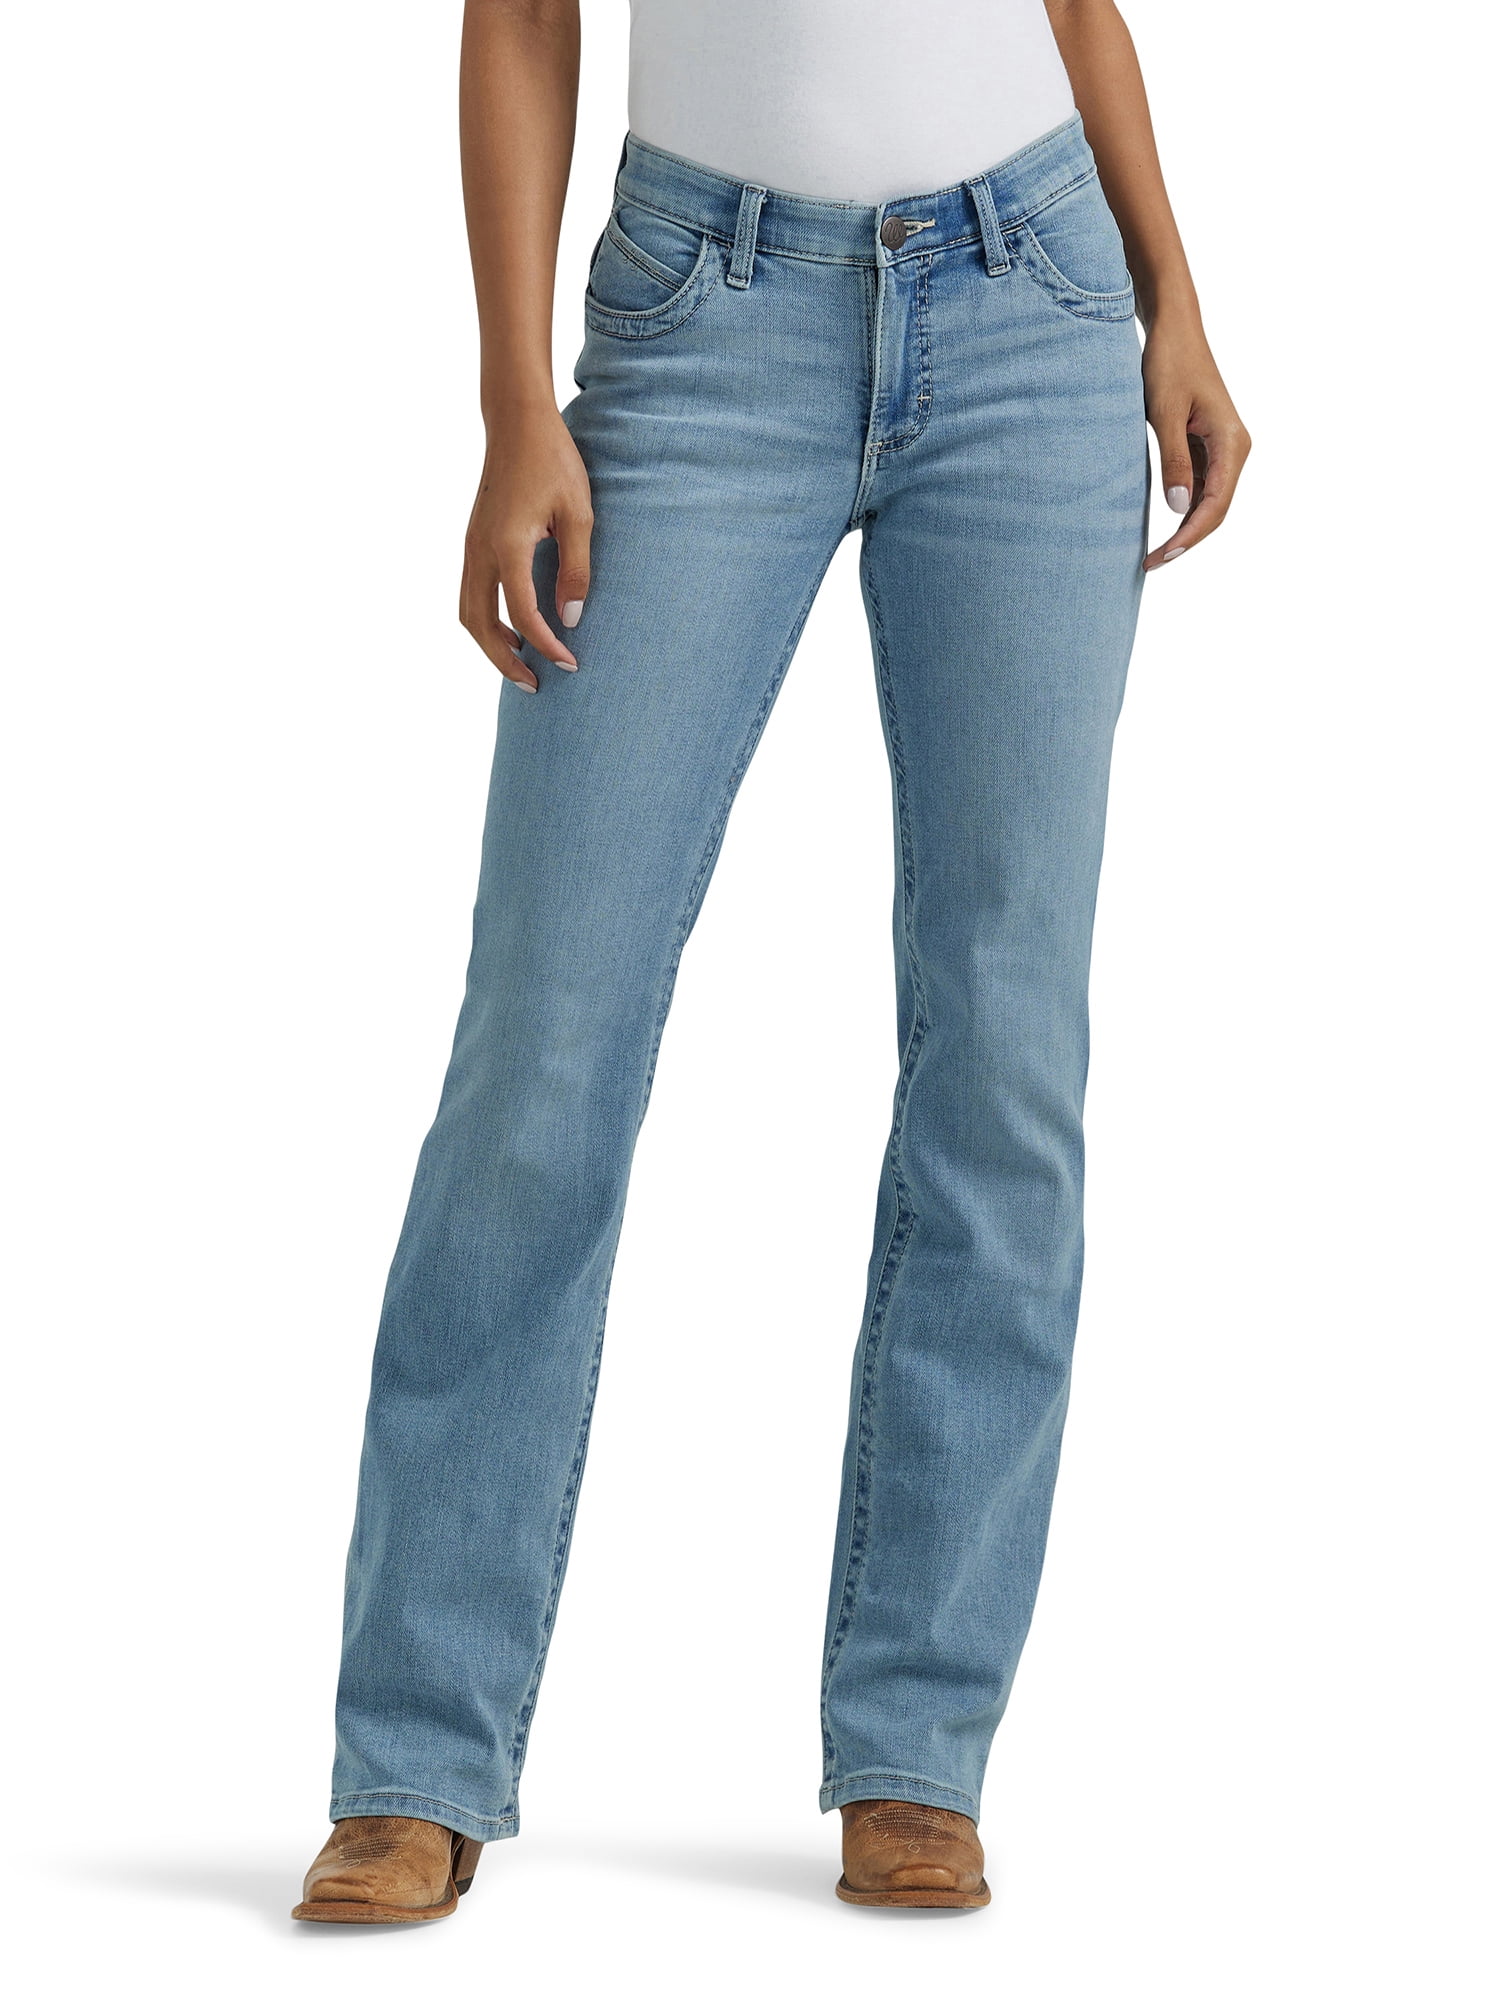 Shop Wrangler Women's Ultimate Riding Jean Willow Bootcut - Great ...